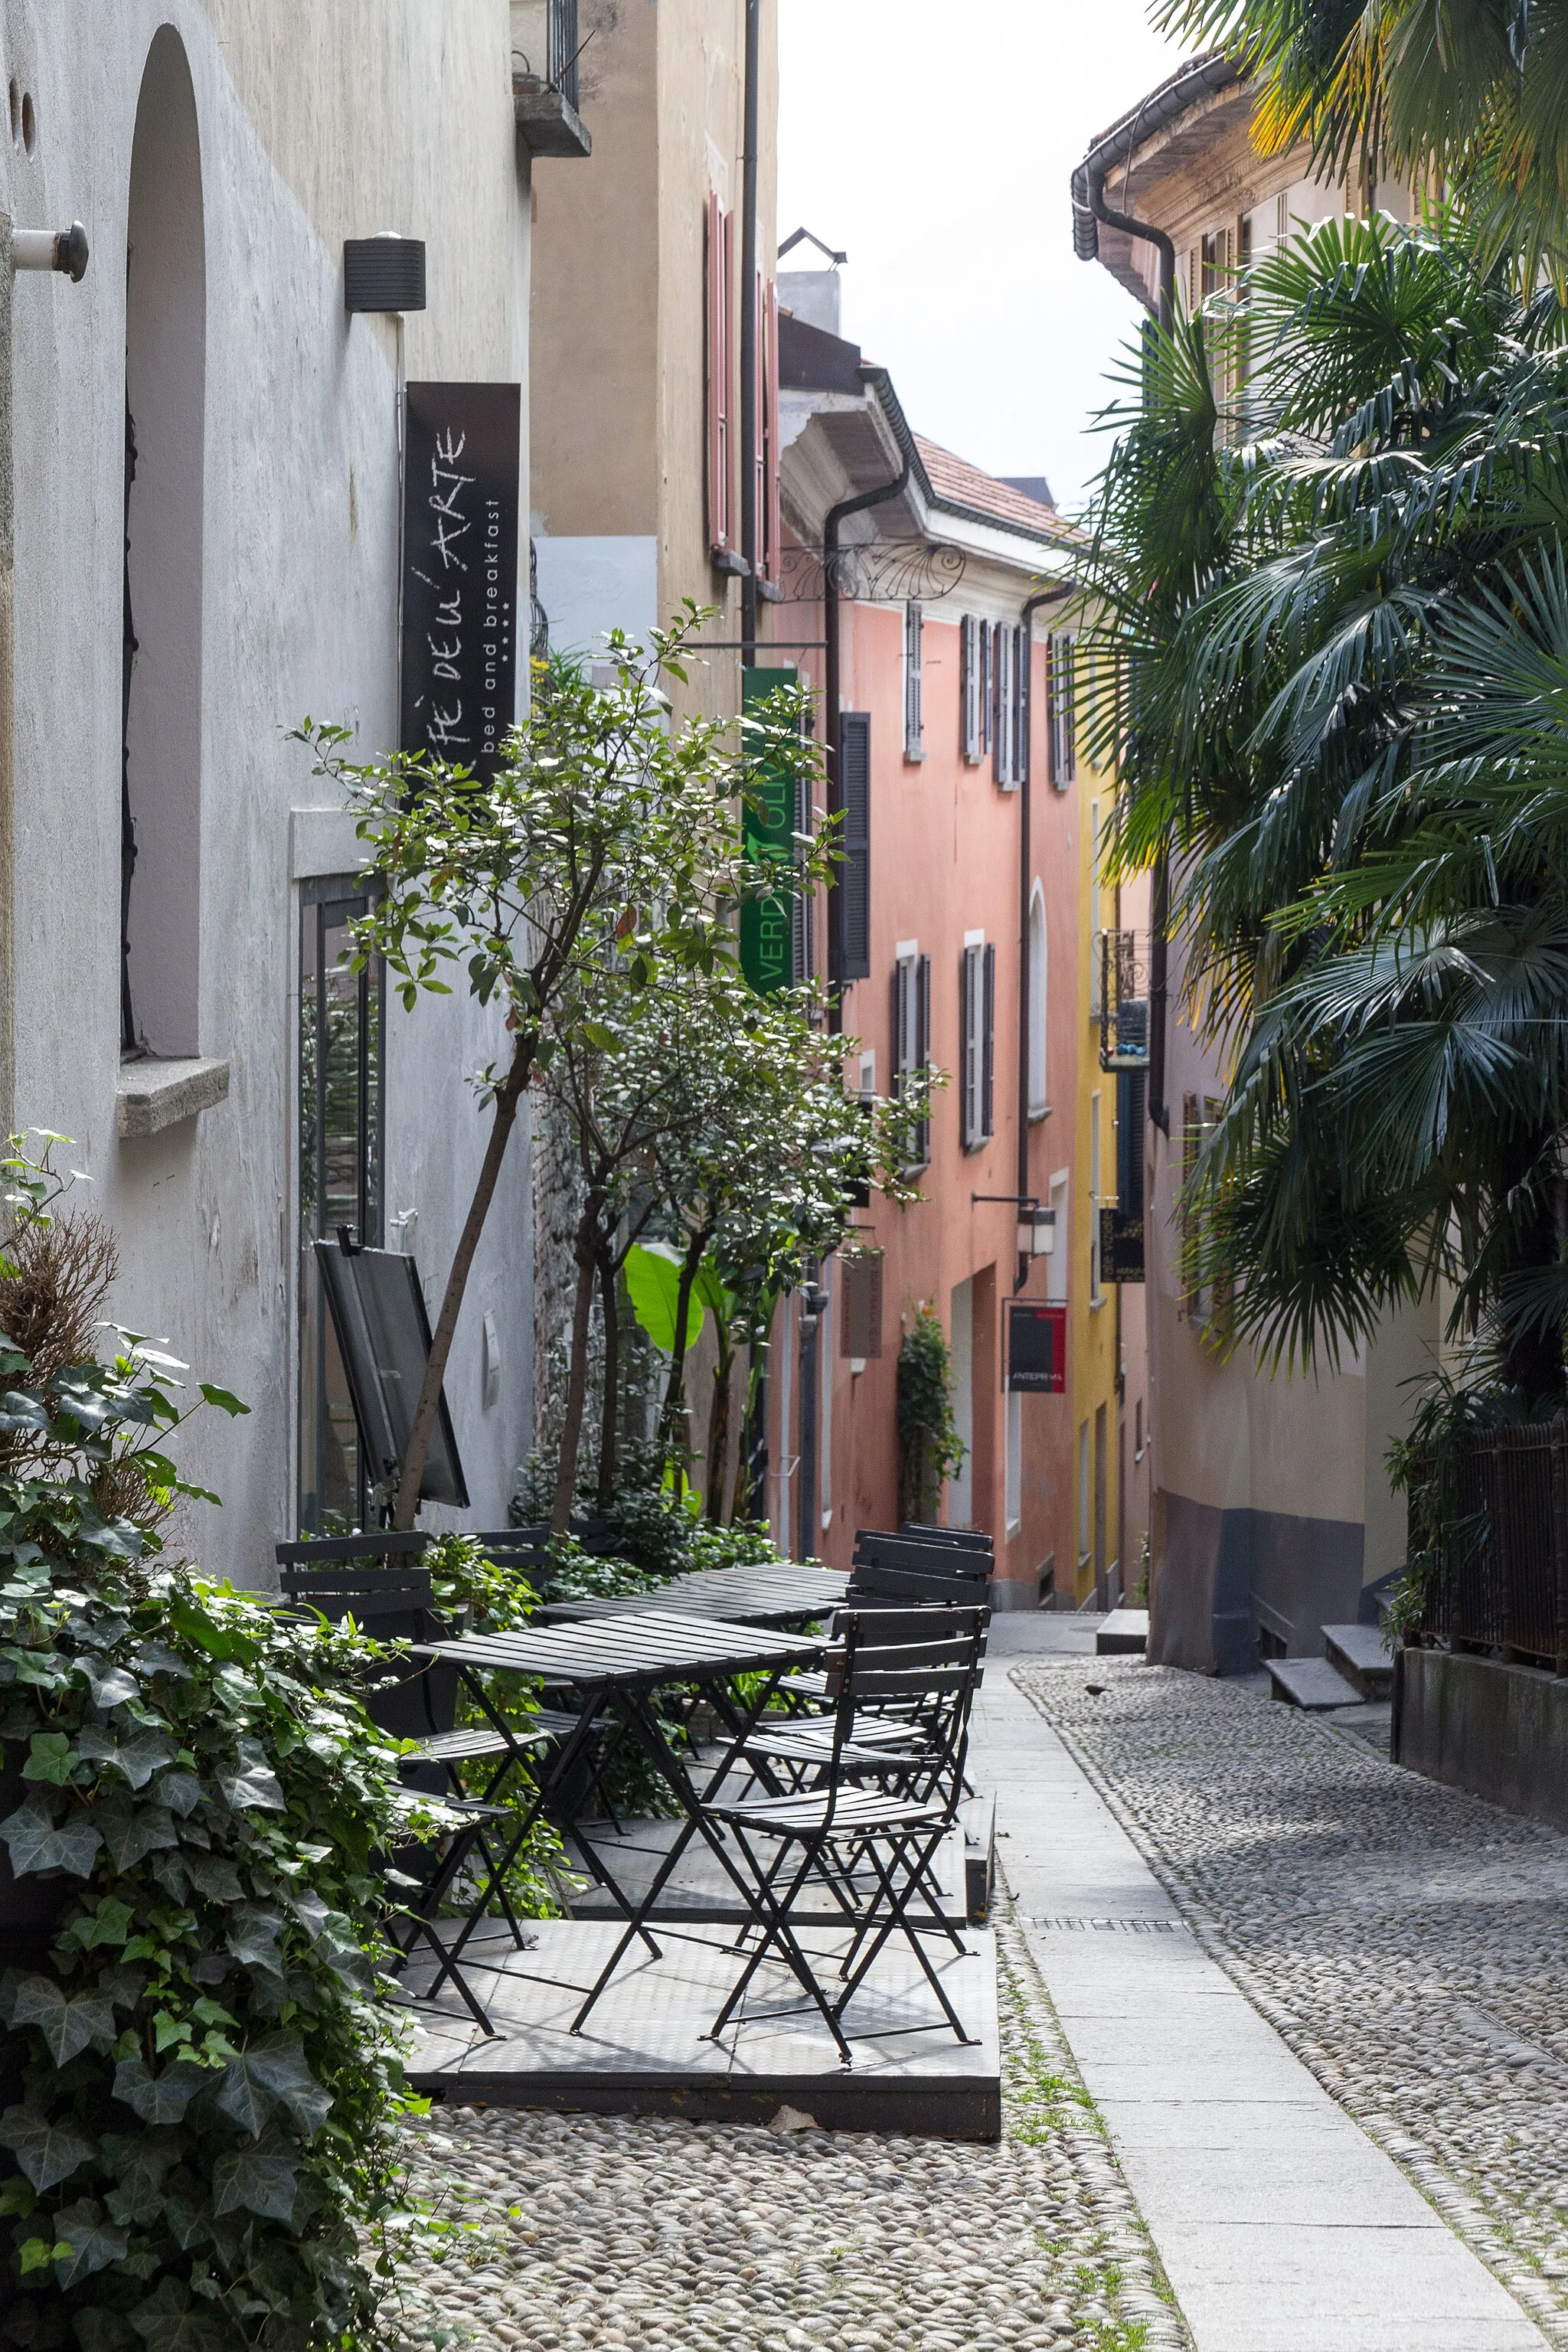 Photo showing: Small street "Via Panigari" in the old town of Locarno, Ticino, Schwitzerland.